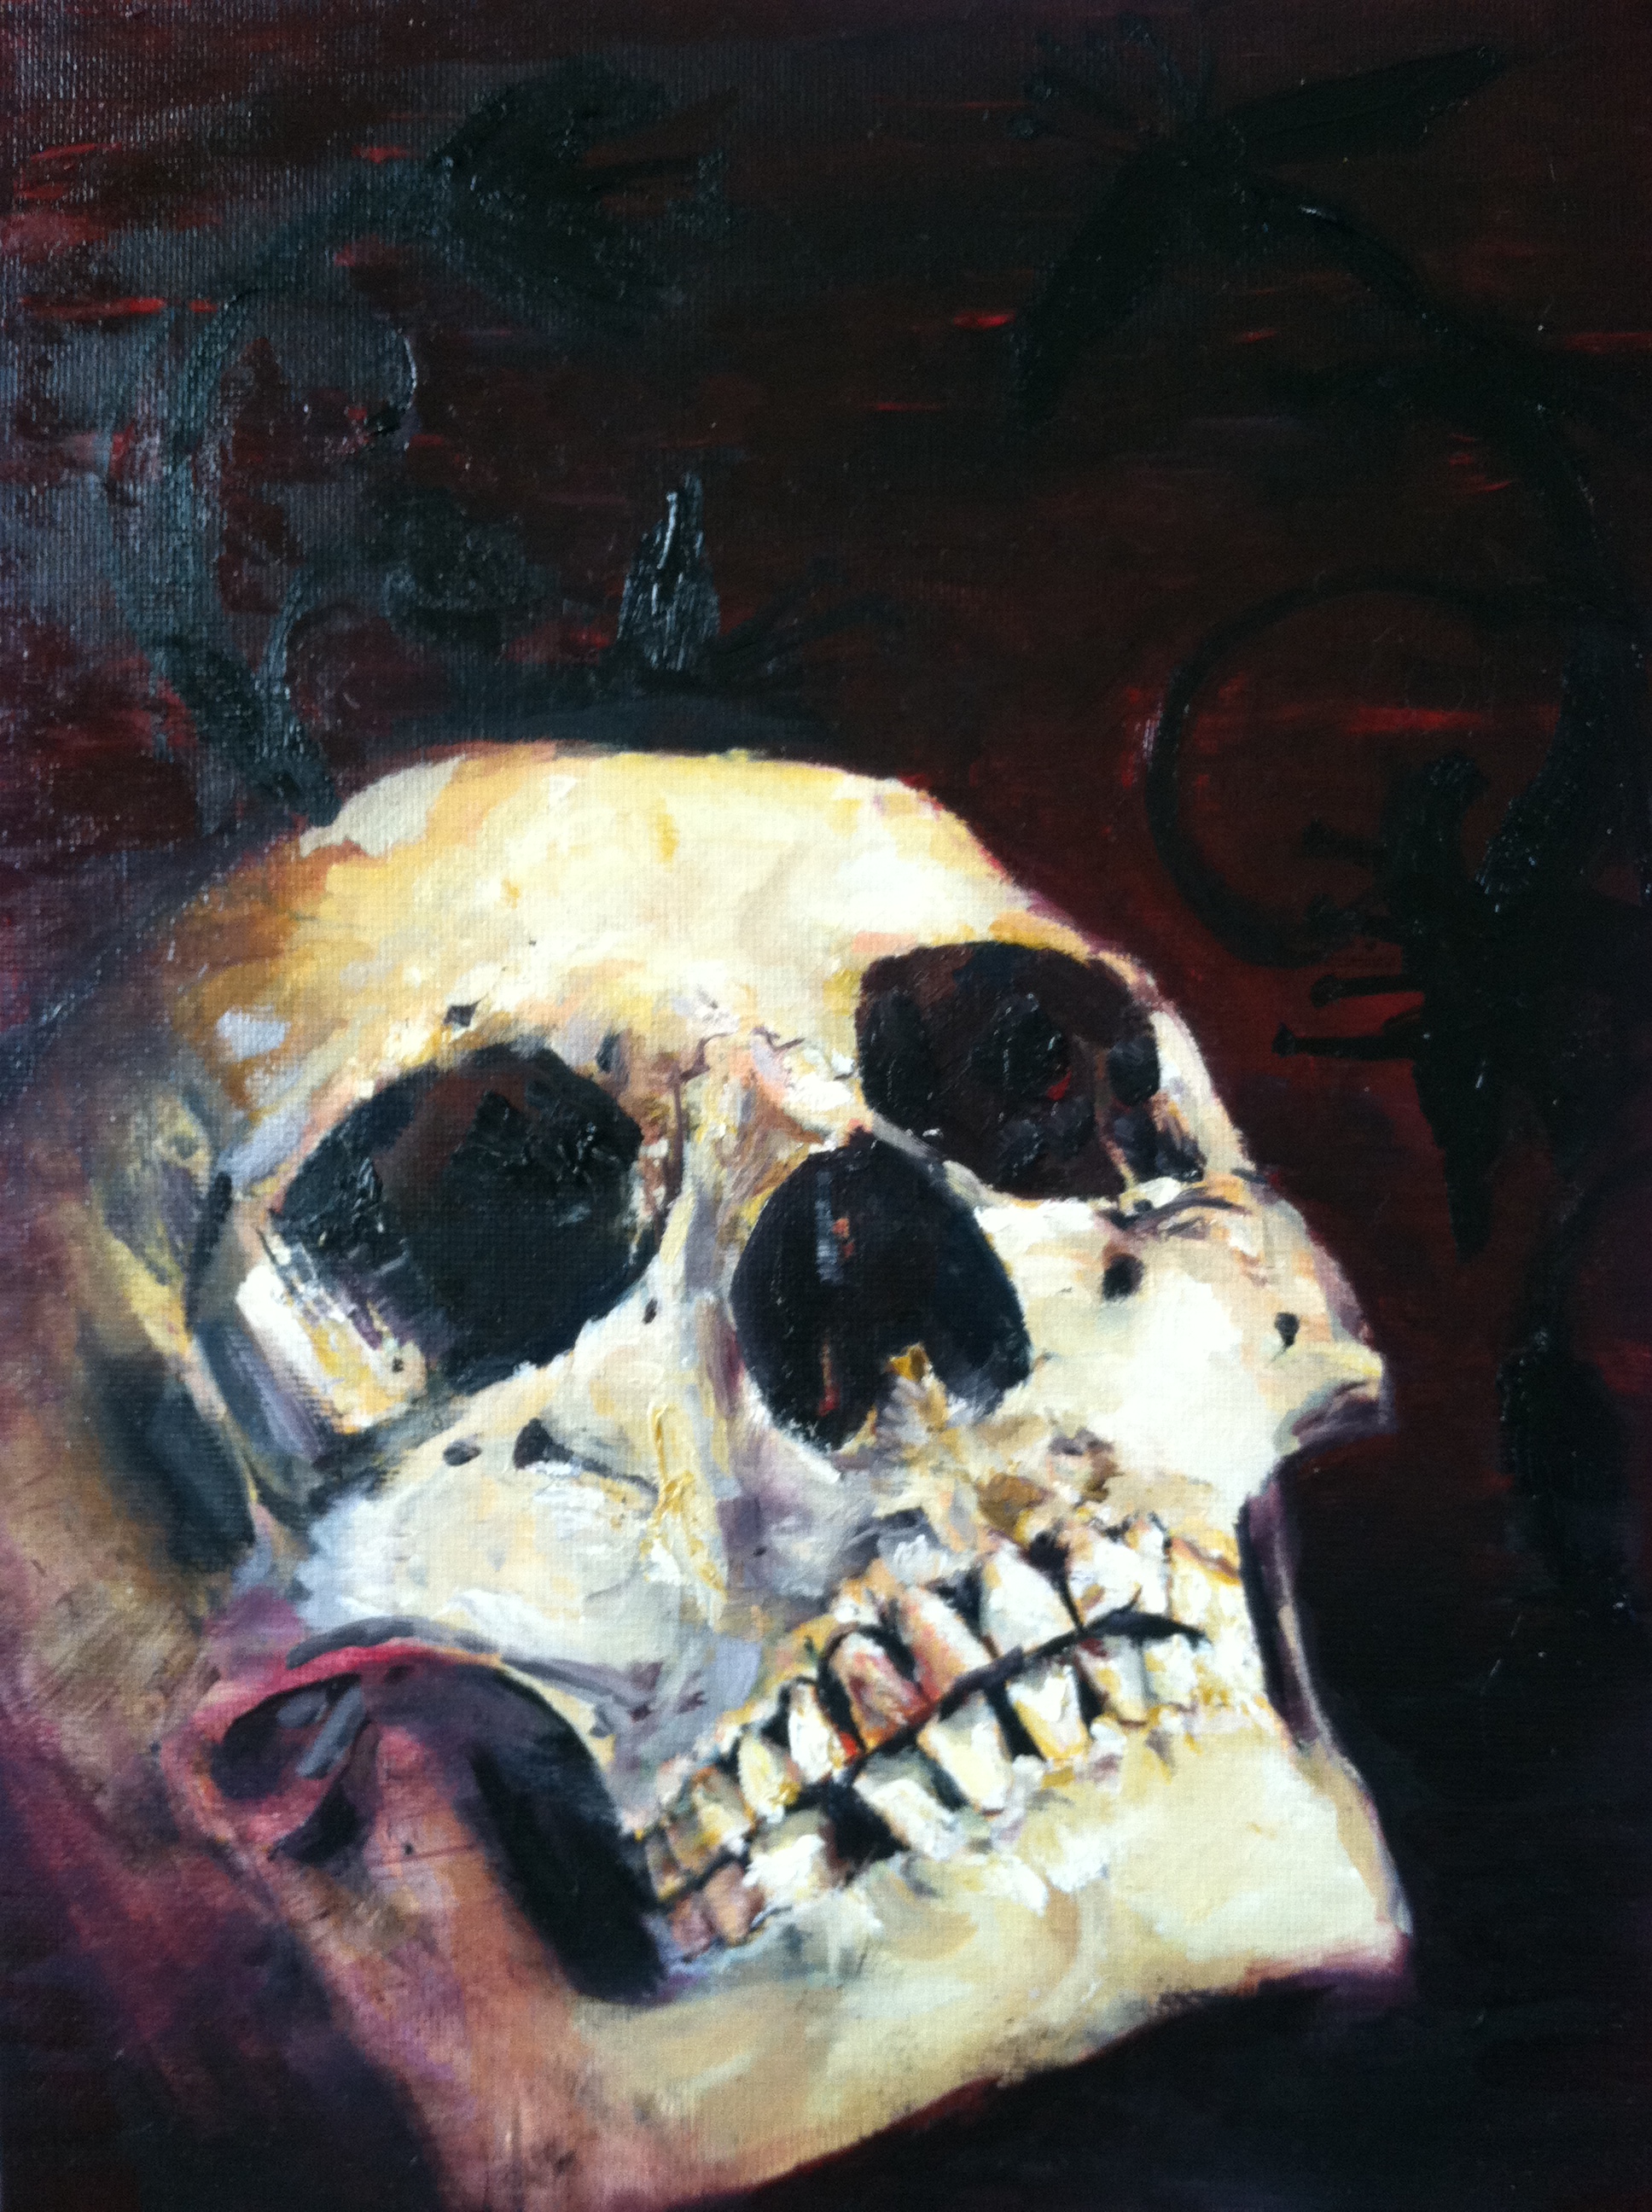 Human skull painted in oil from photo reference with flower silhouettes.